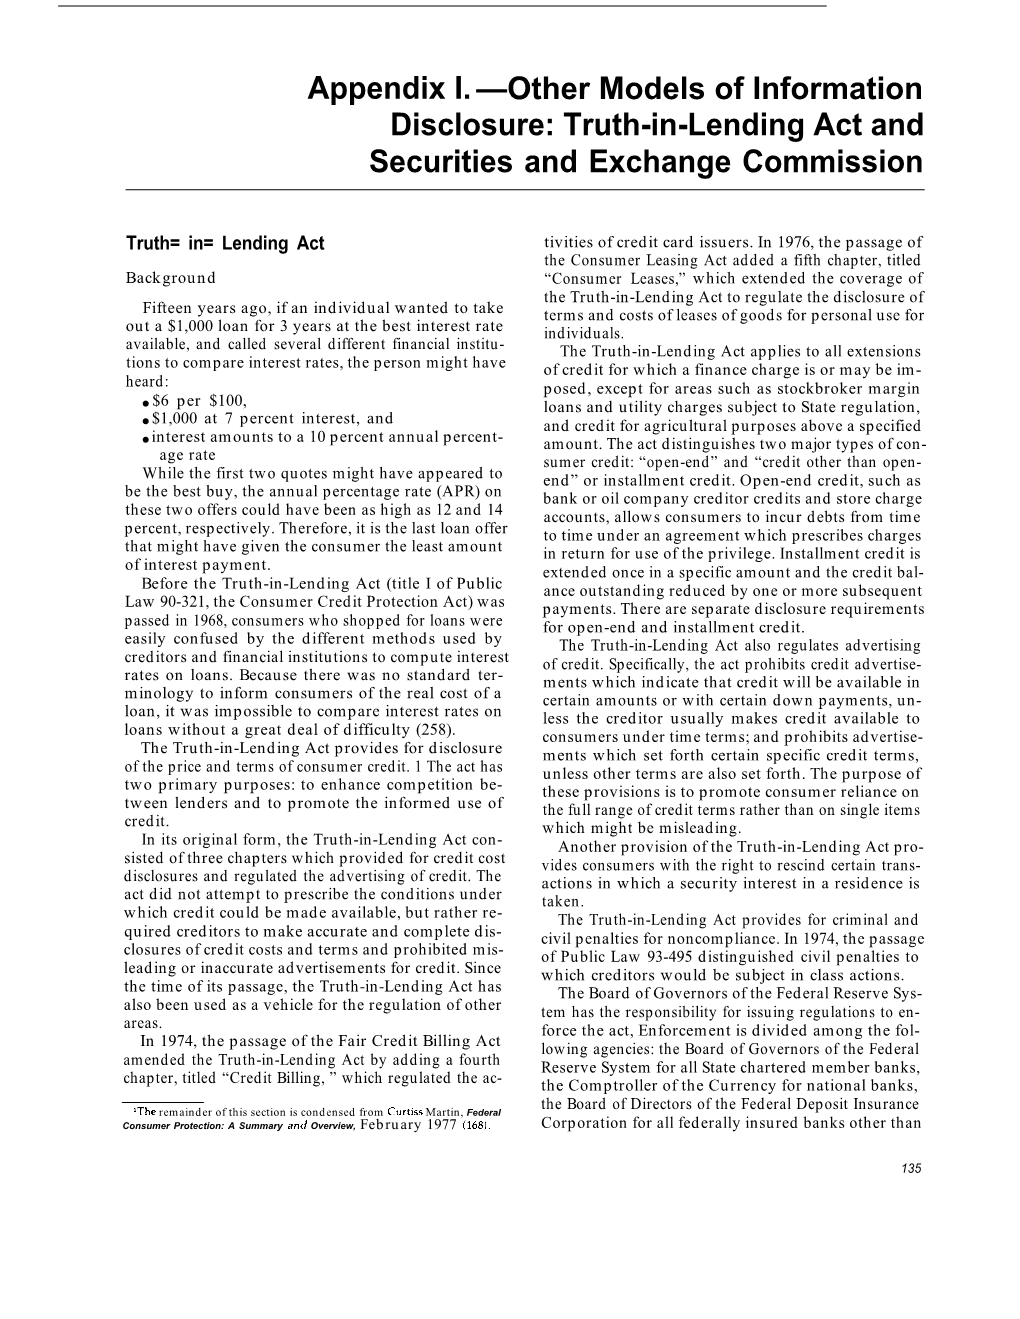 Truth-In-Lending Act and Securities and Exchange Commission